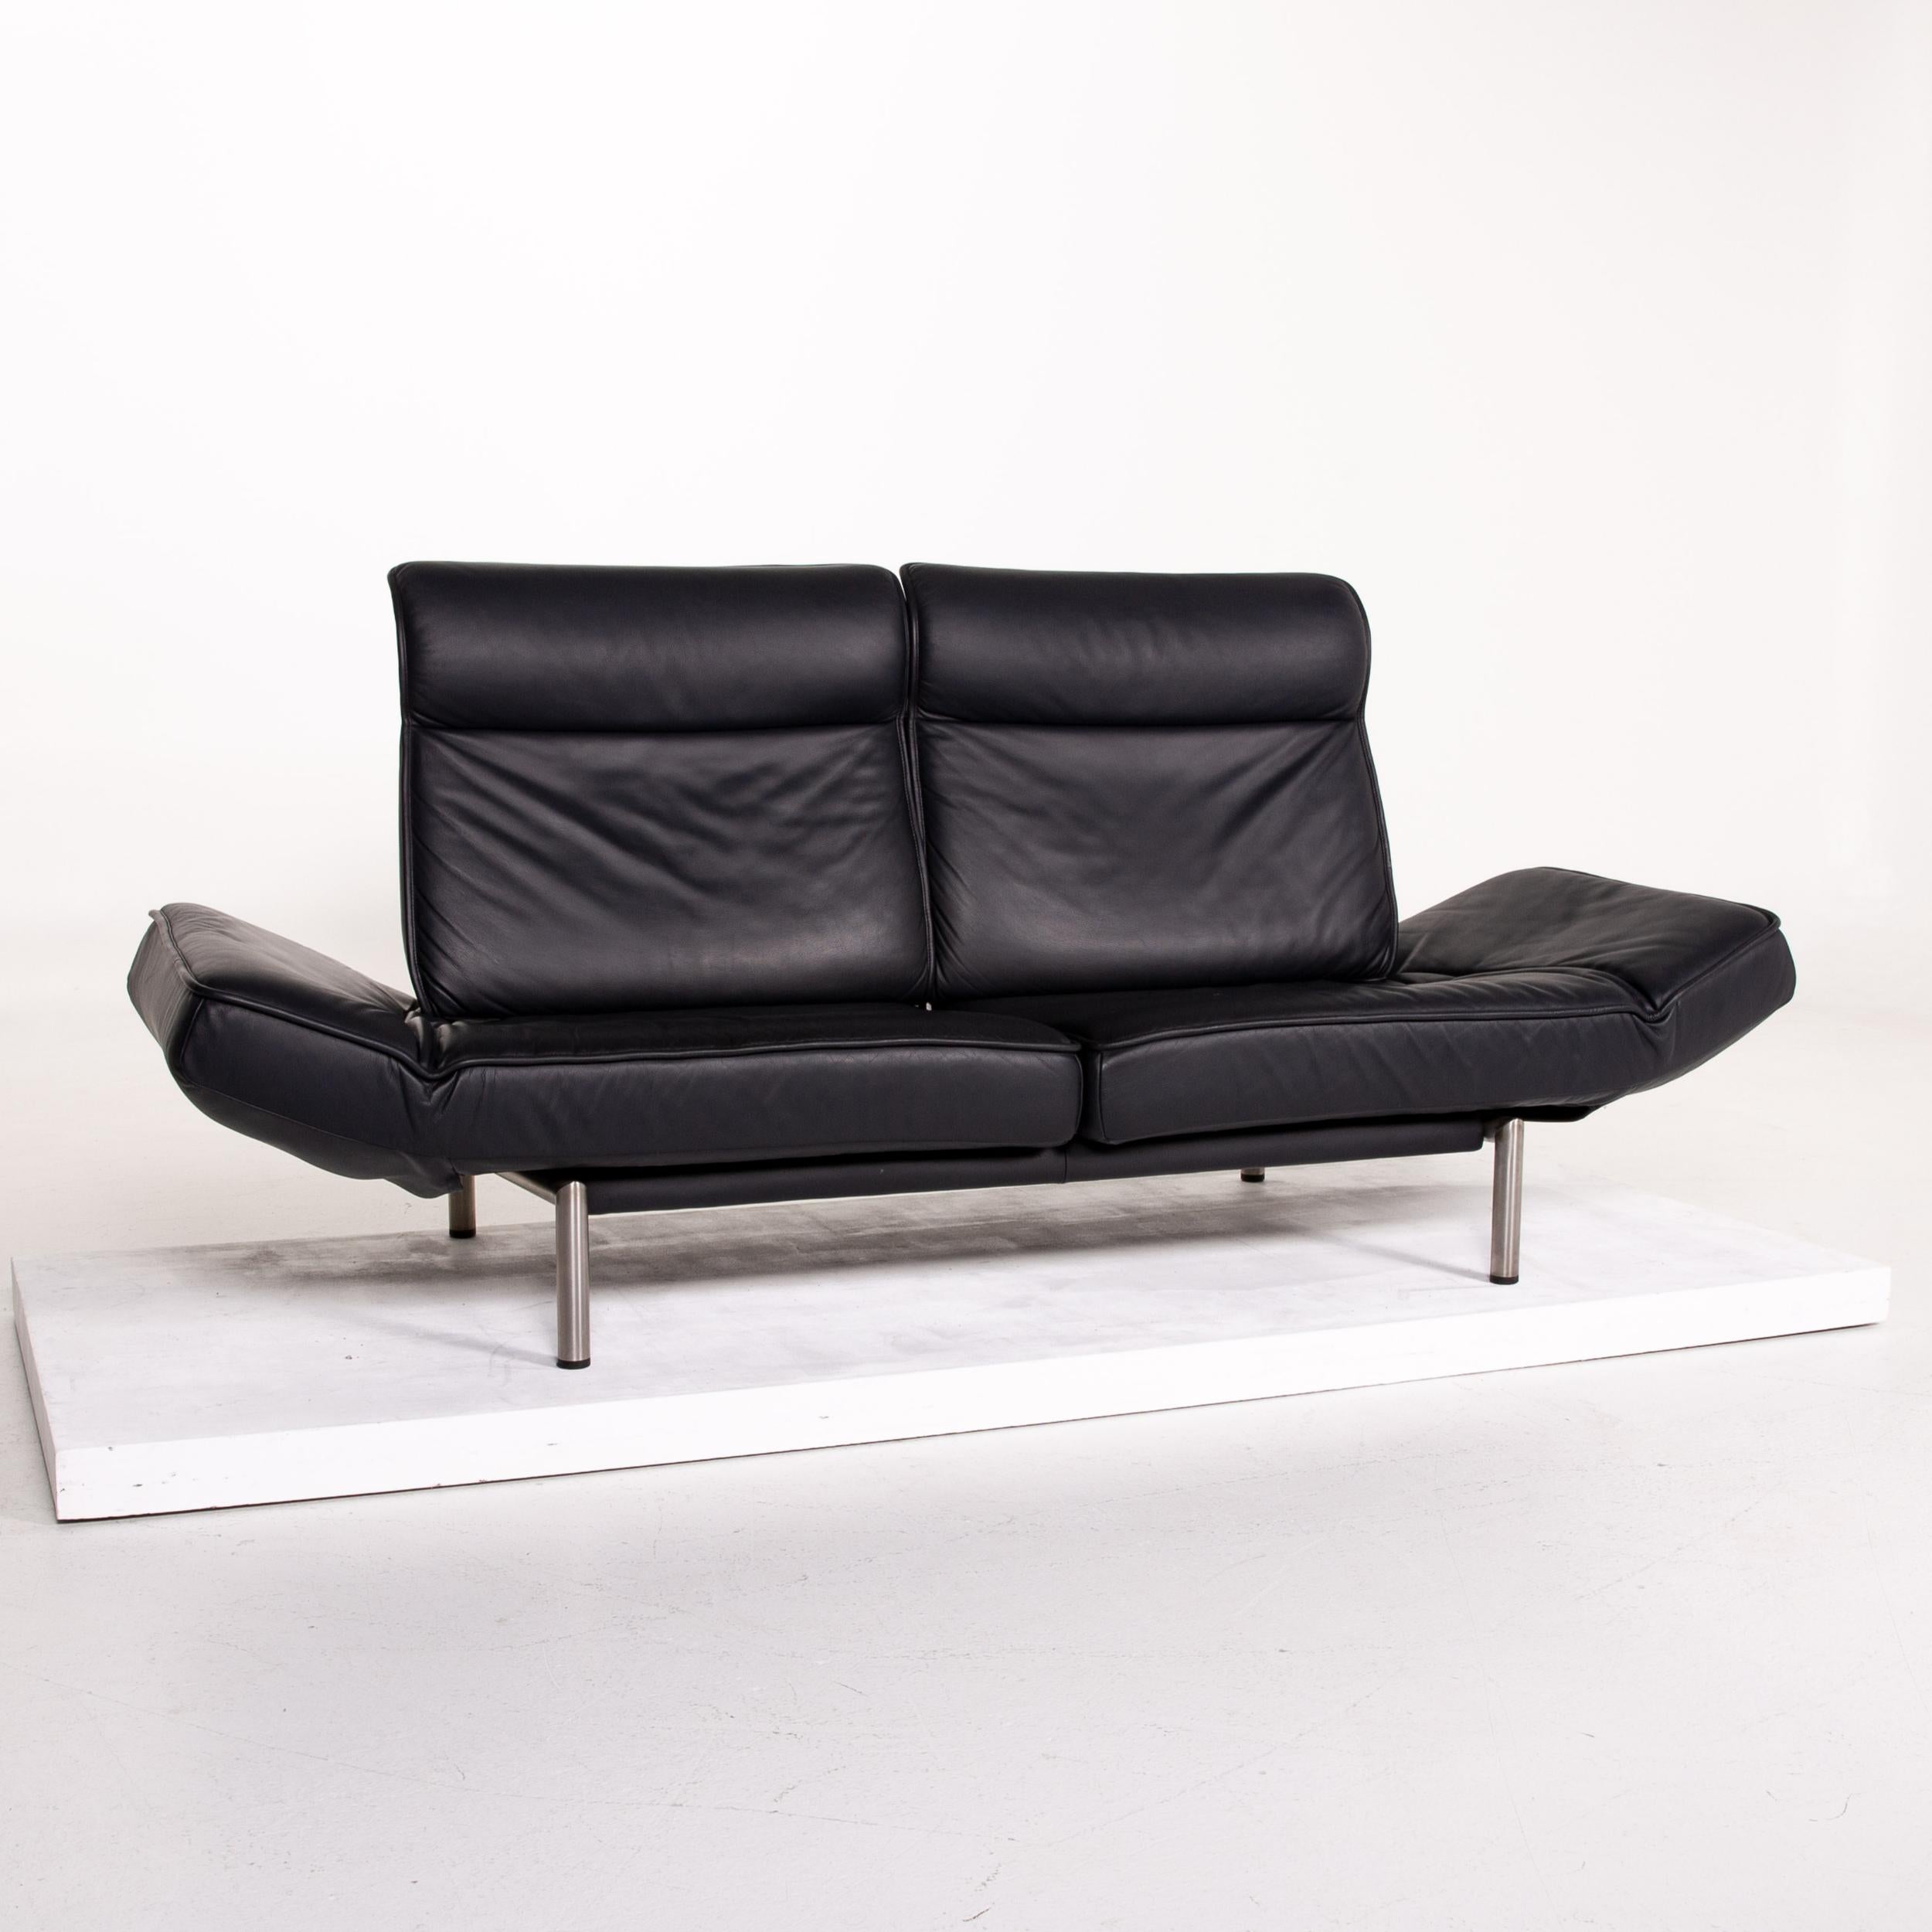 De Sede DS 450 Leather Sofa Black Two-Seat Function Relax Function Couch 2